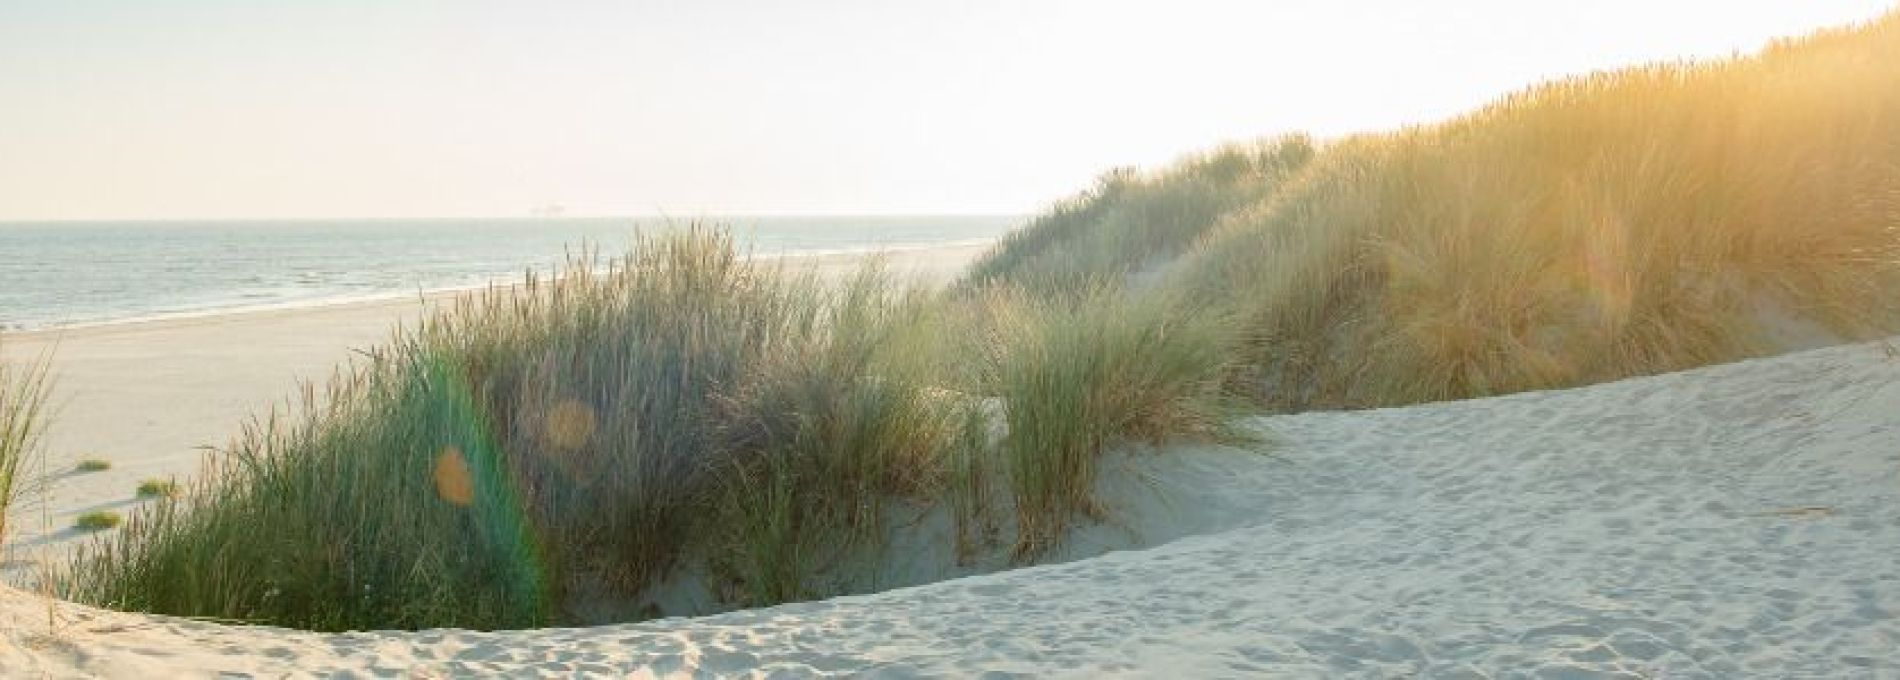 Frequently asked questions about the beach of Ameland - Tourist Information Centre VVV Ameland.